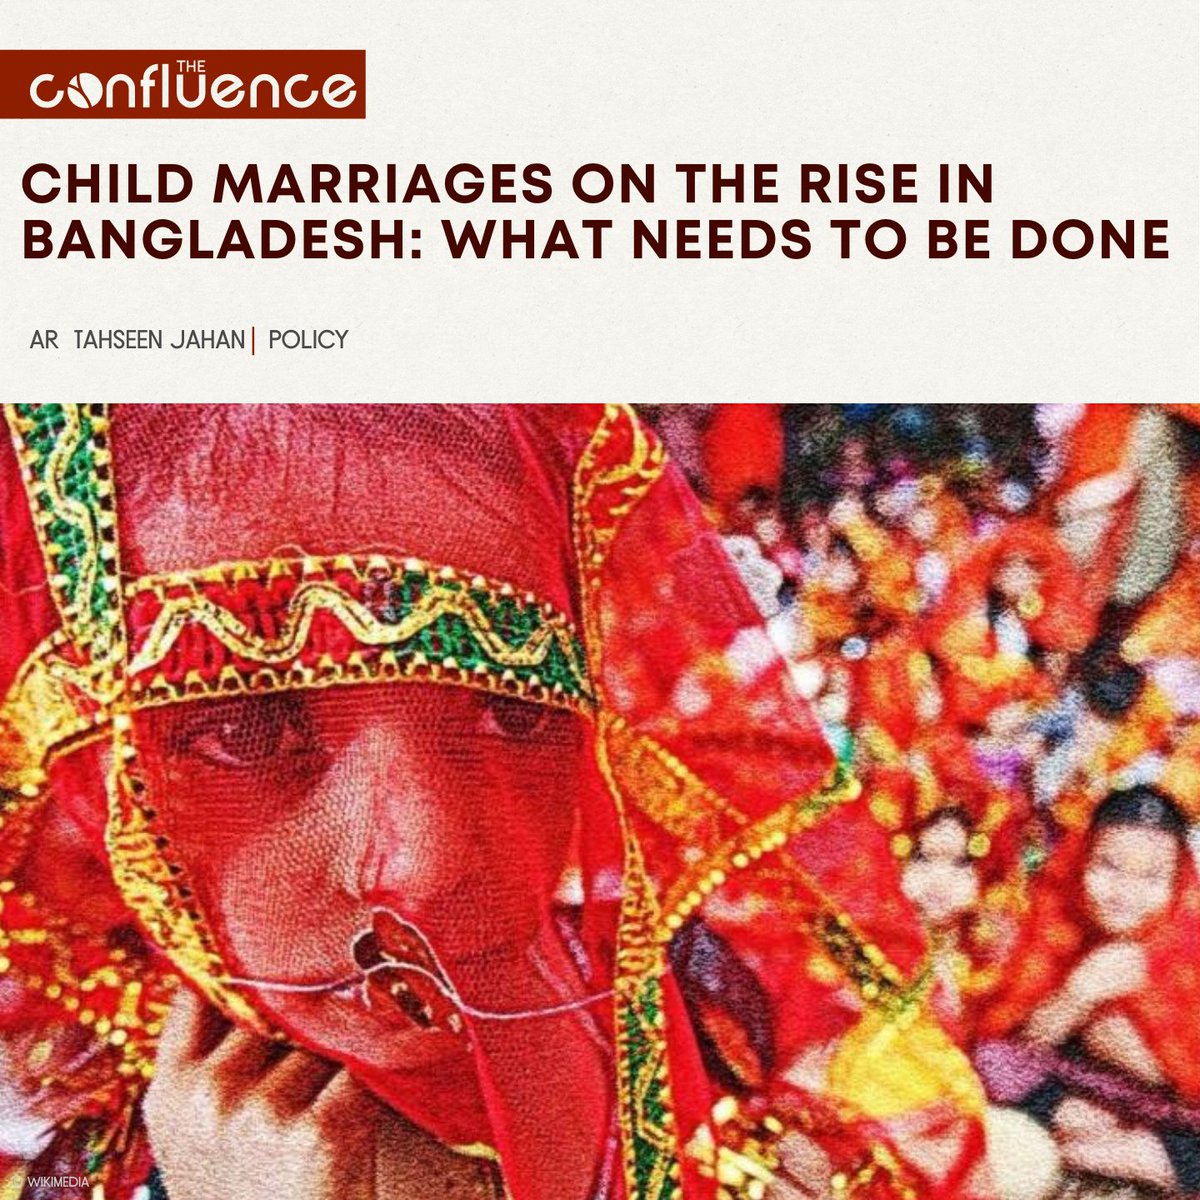 In recent times, #childmarriages rose sharply in #Bangladesh, despite having a strict law and a proactive police and admin. So, what factors are behind the recent spike? And what can be done about them? Read @AR_TahseenJahan's take here 👇
theconfluence.blog/child-marriage…
#GirlsNotBrides